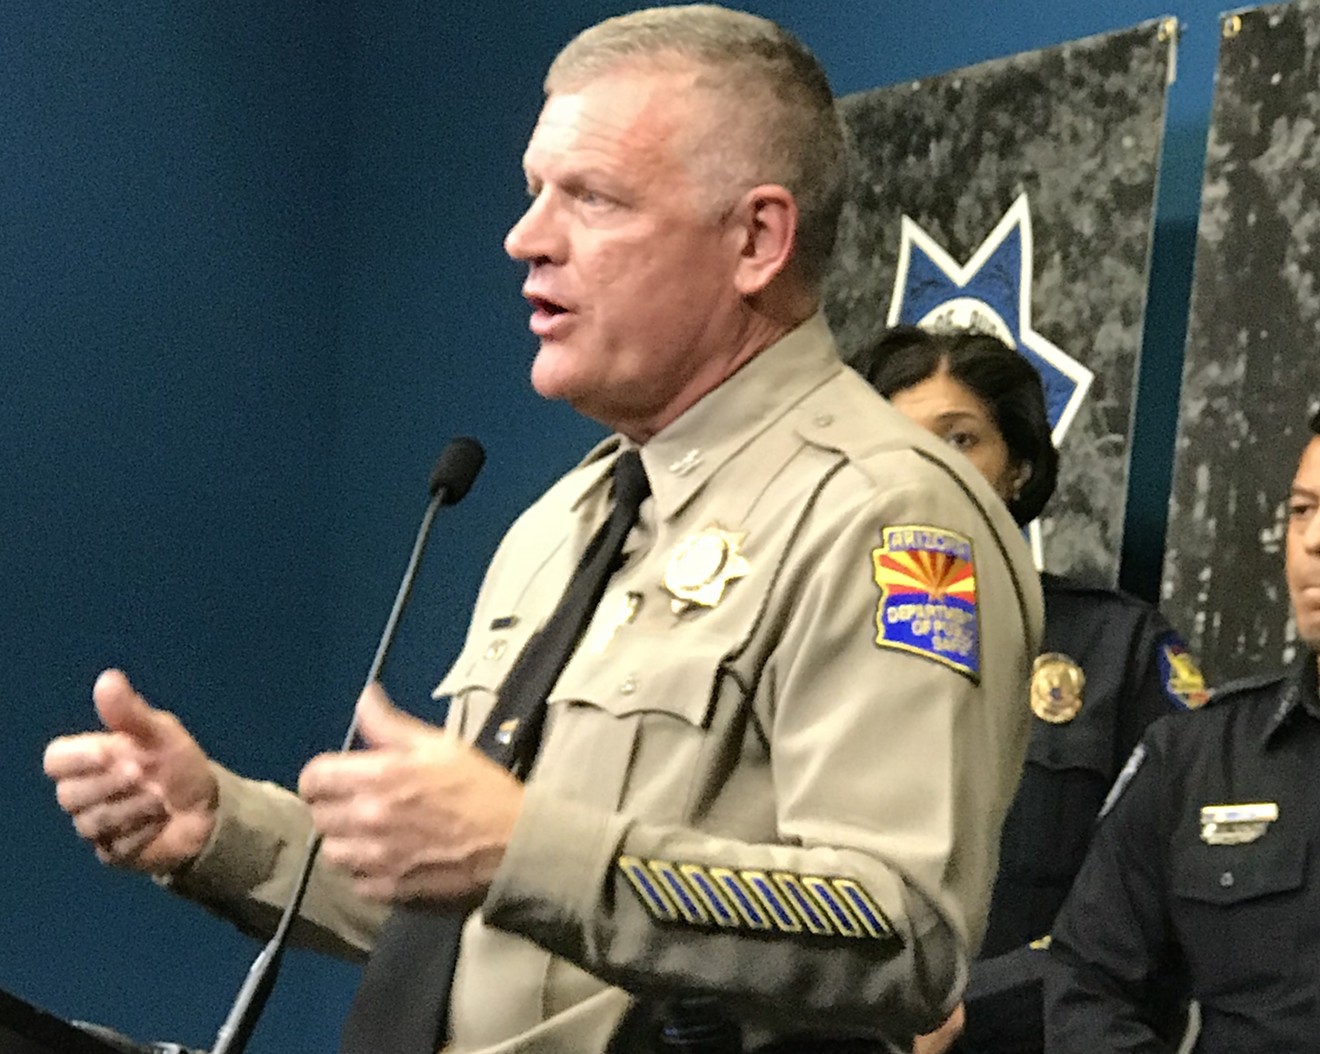 Arizona Department of Public Safety Director Col. Frank Milstead explains the rash of recent gun violence on Interstate 10 at a November 29, 2017, press conference.